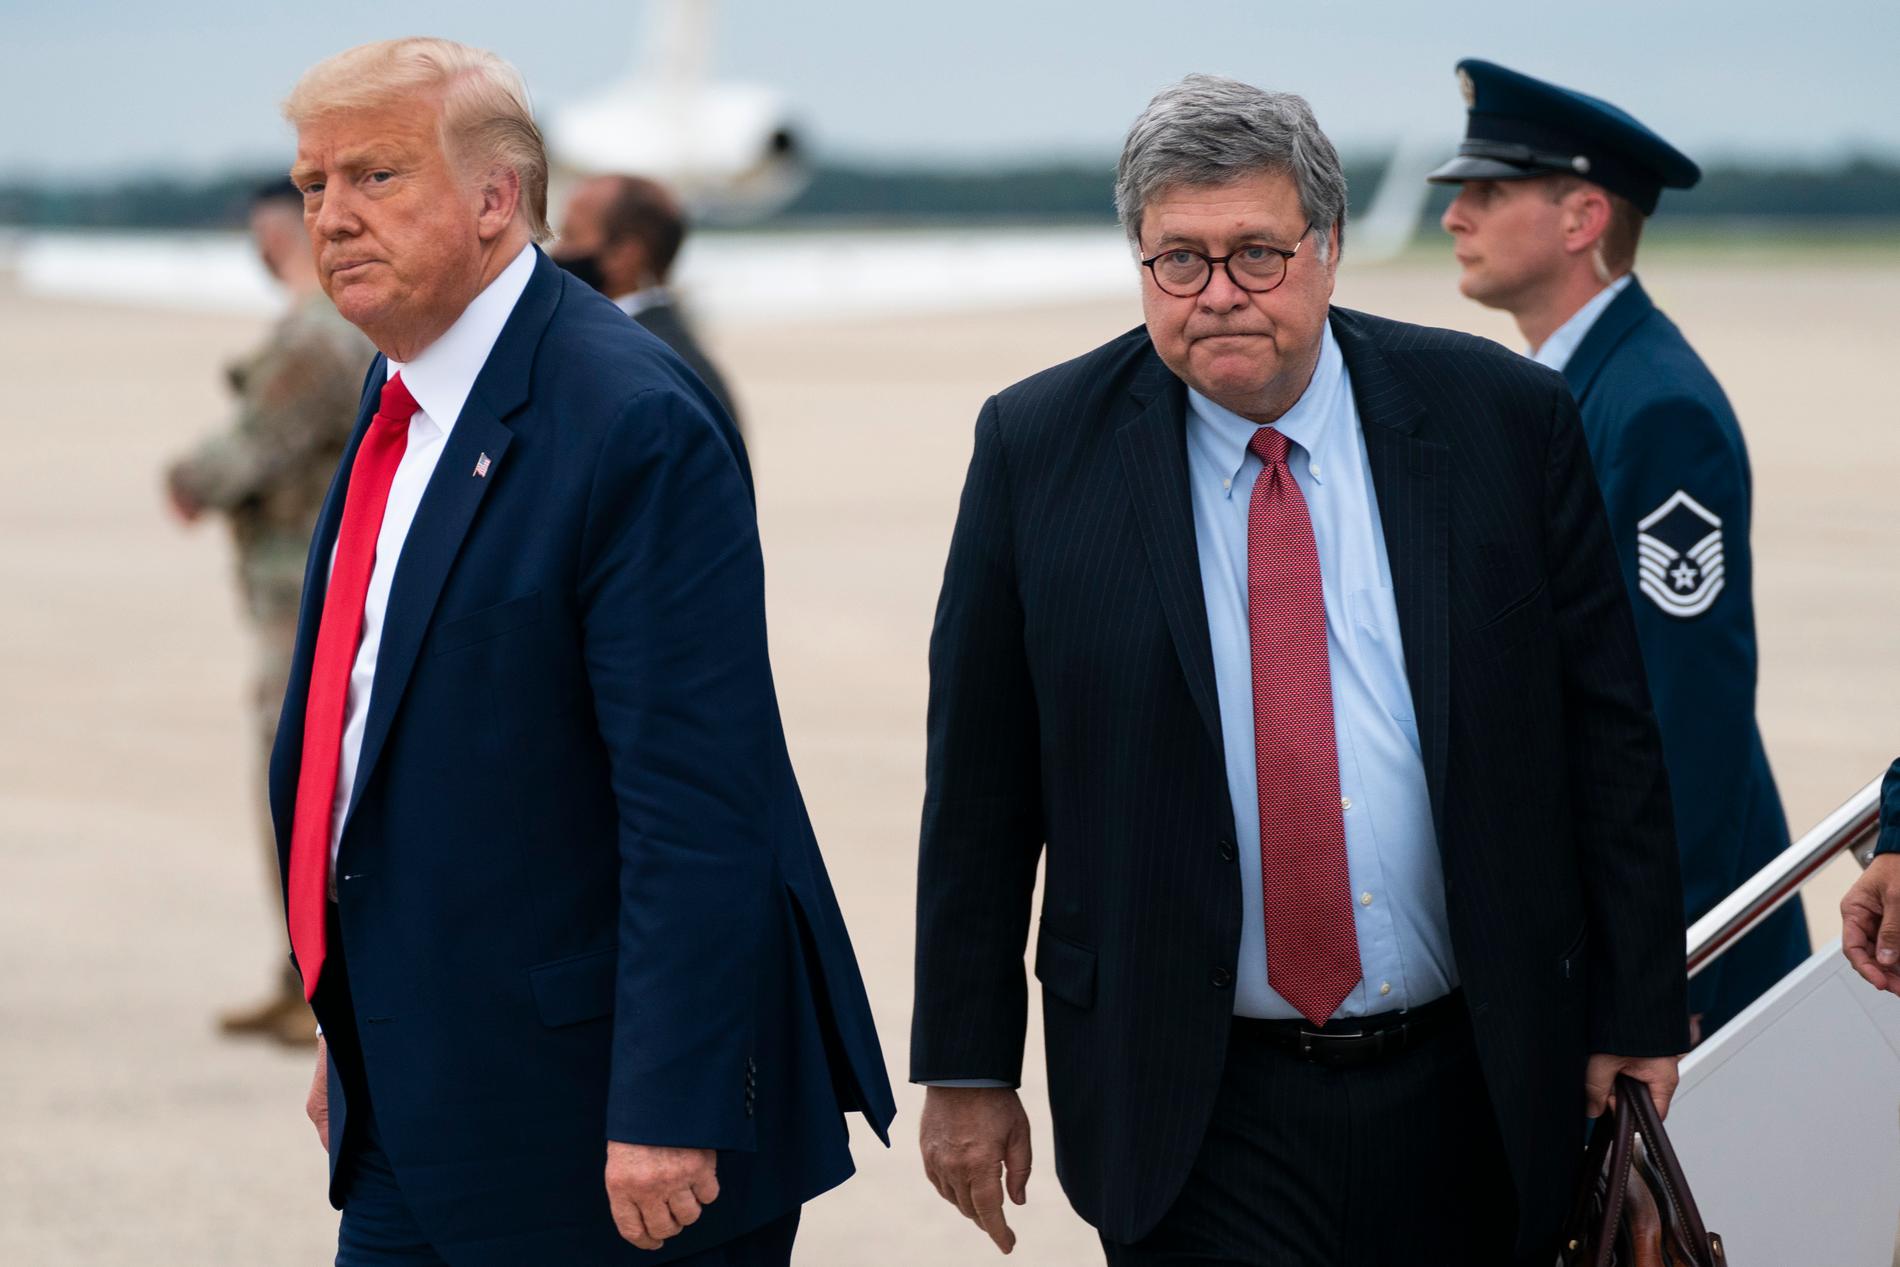 Barr: Only Trump is responsible